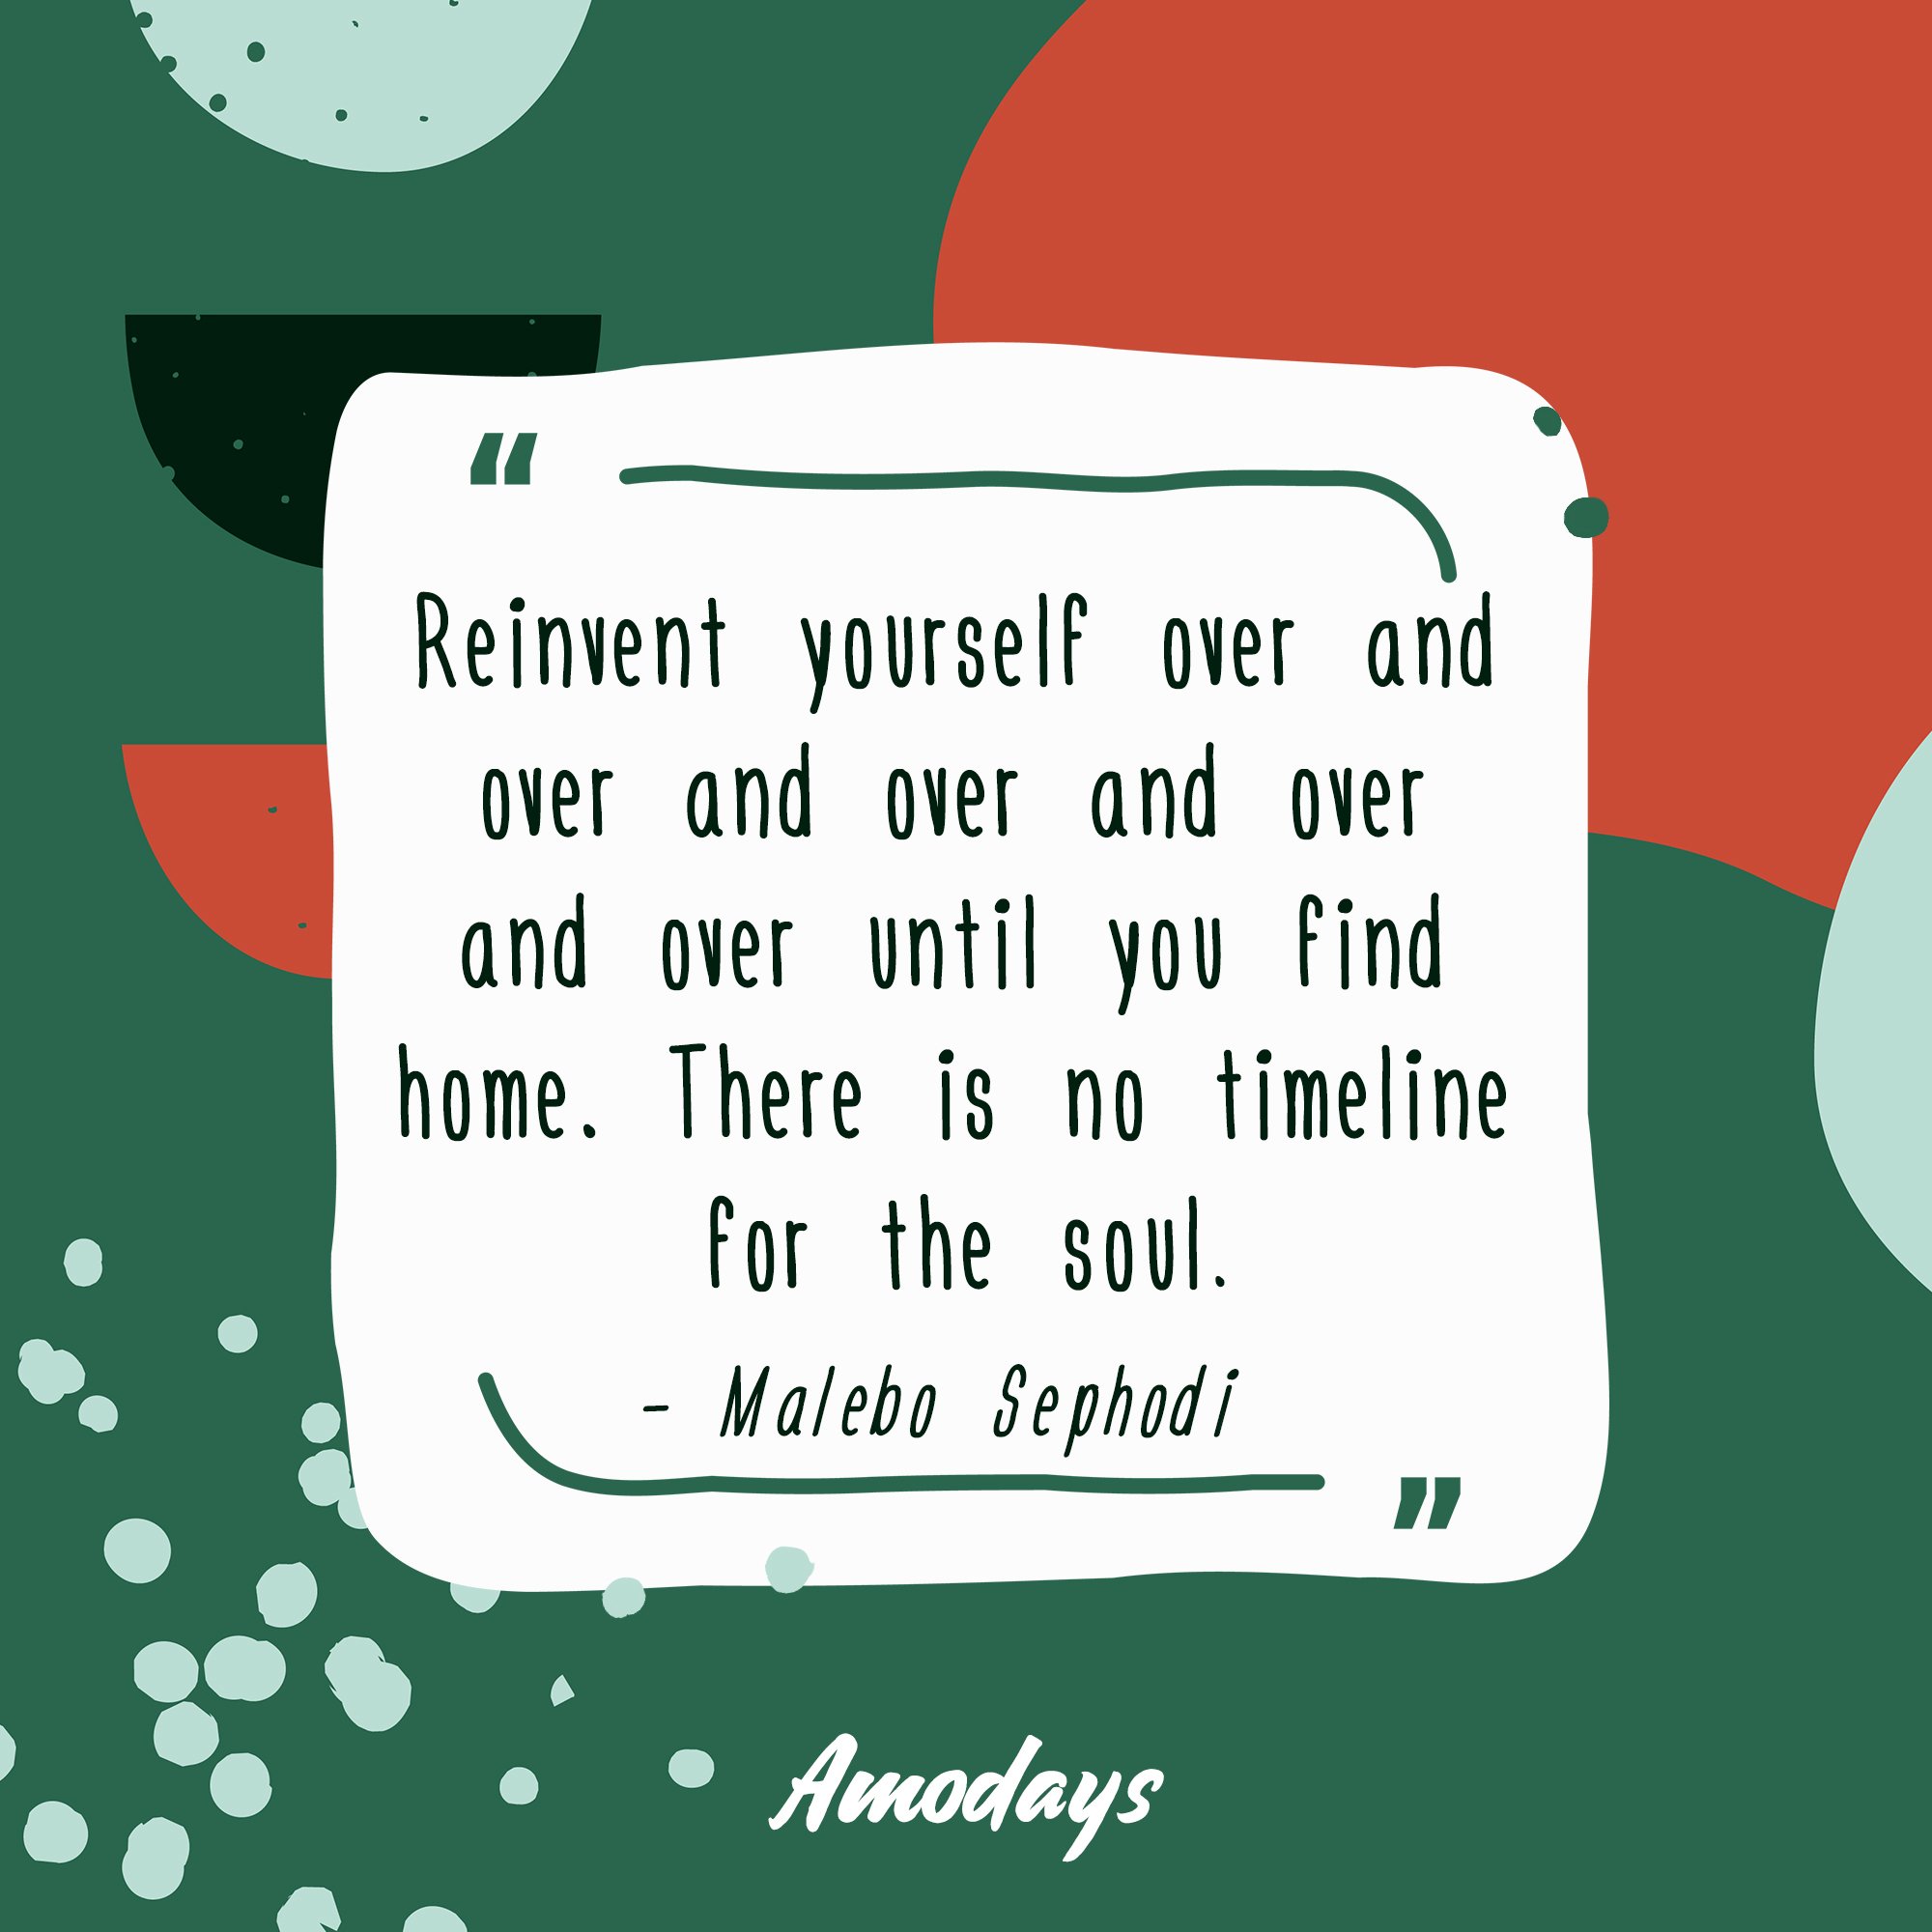 Malebo Sephodi's quote "Reinvent yourself over and over and over and over and over until you find home. There is no timeline for the soul." | Image: AmoDays